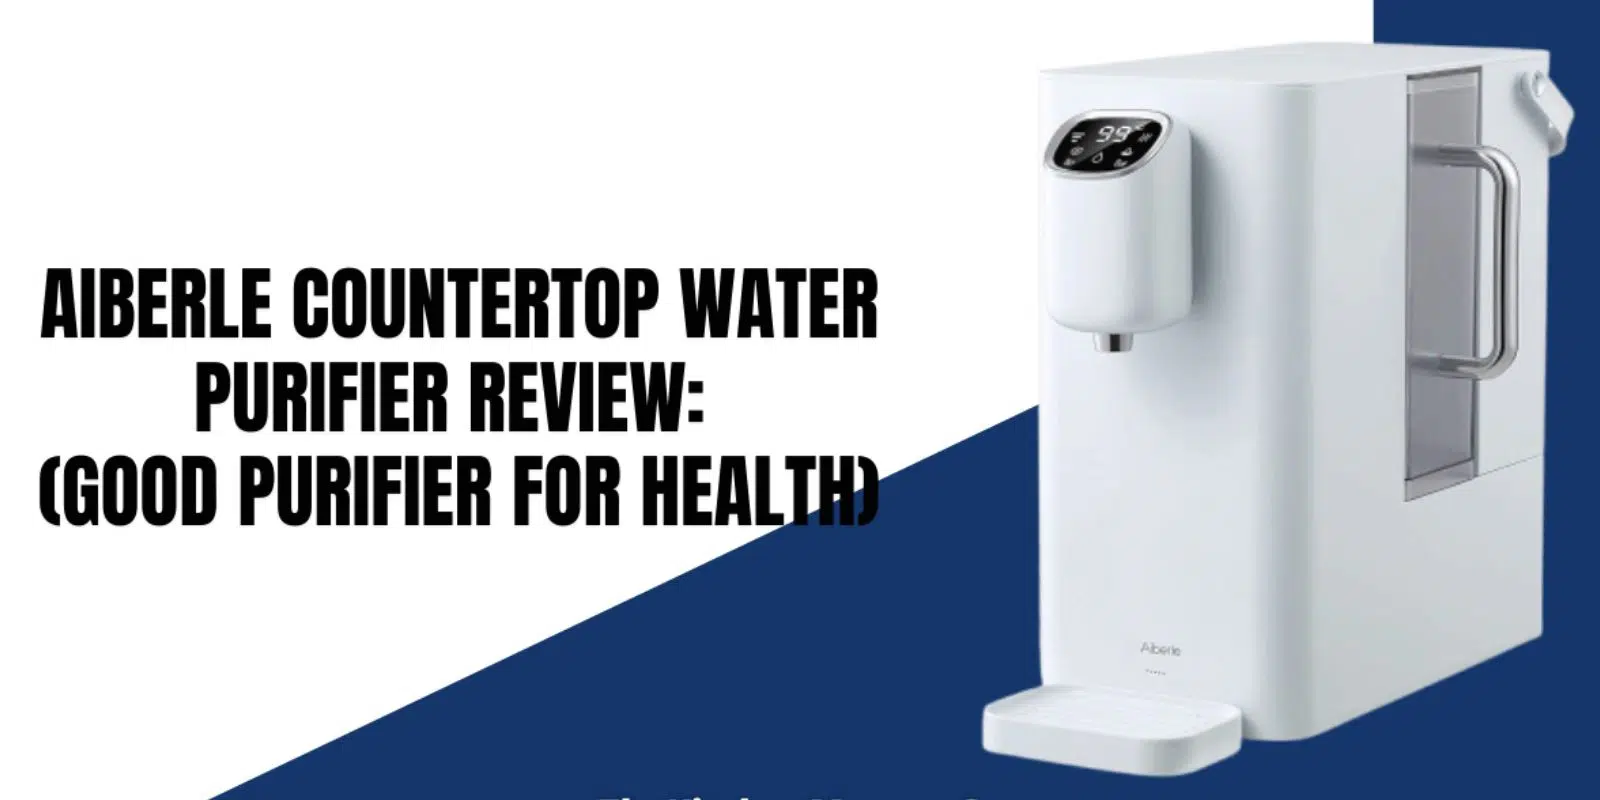 AIBERLE Countertop Water Purifier Review | Specification, Features, Pros & Cons